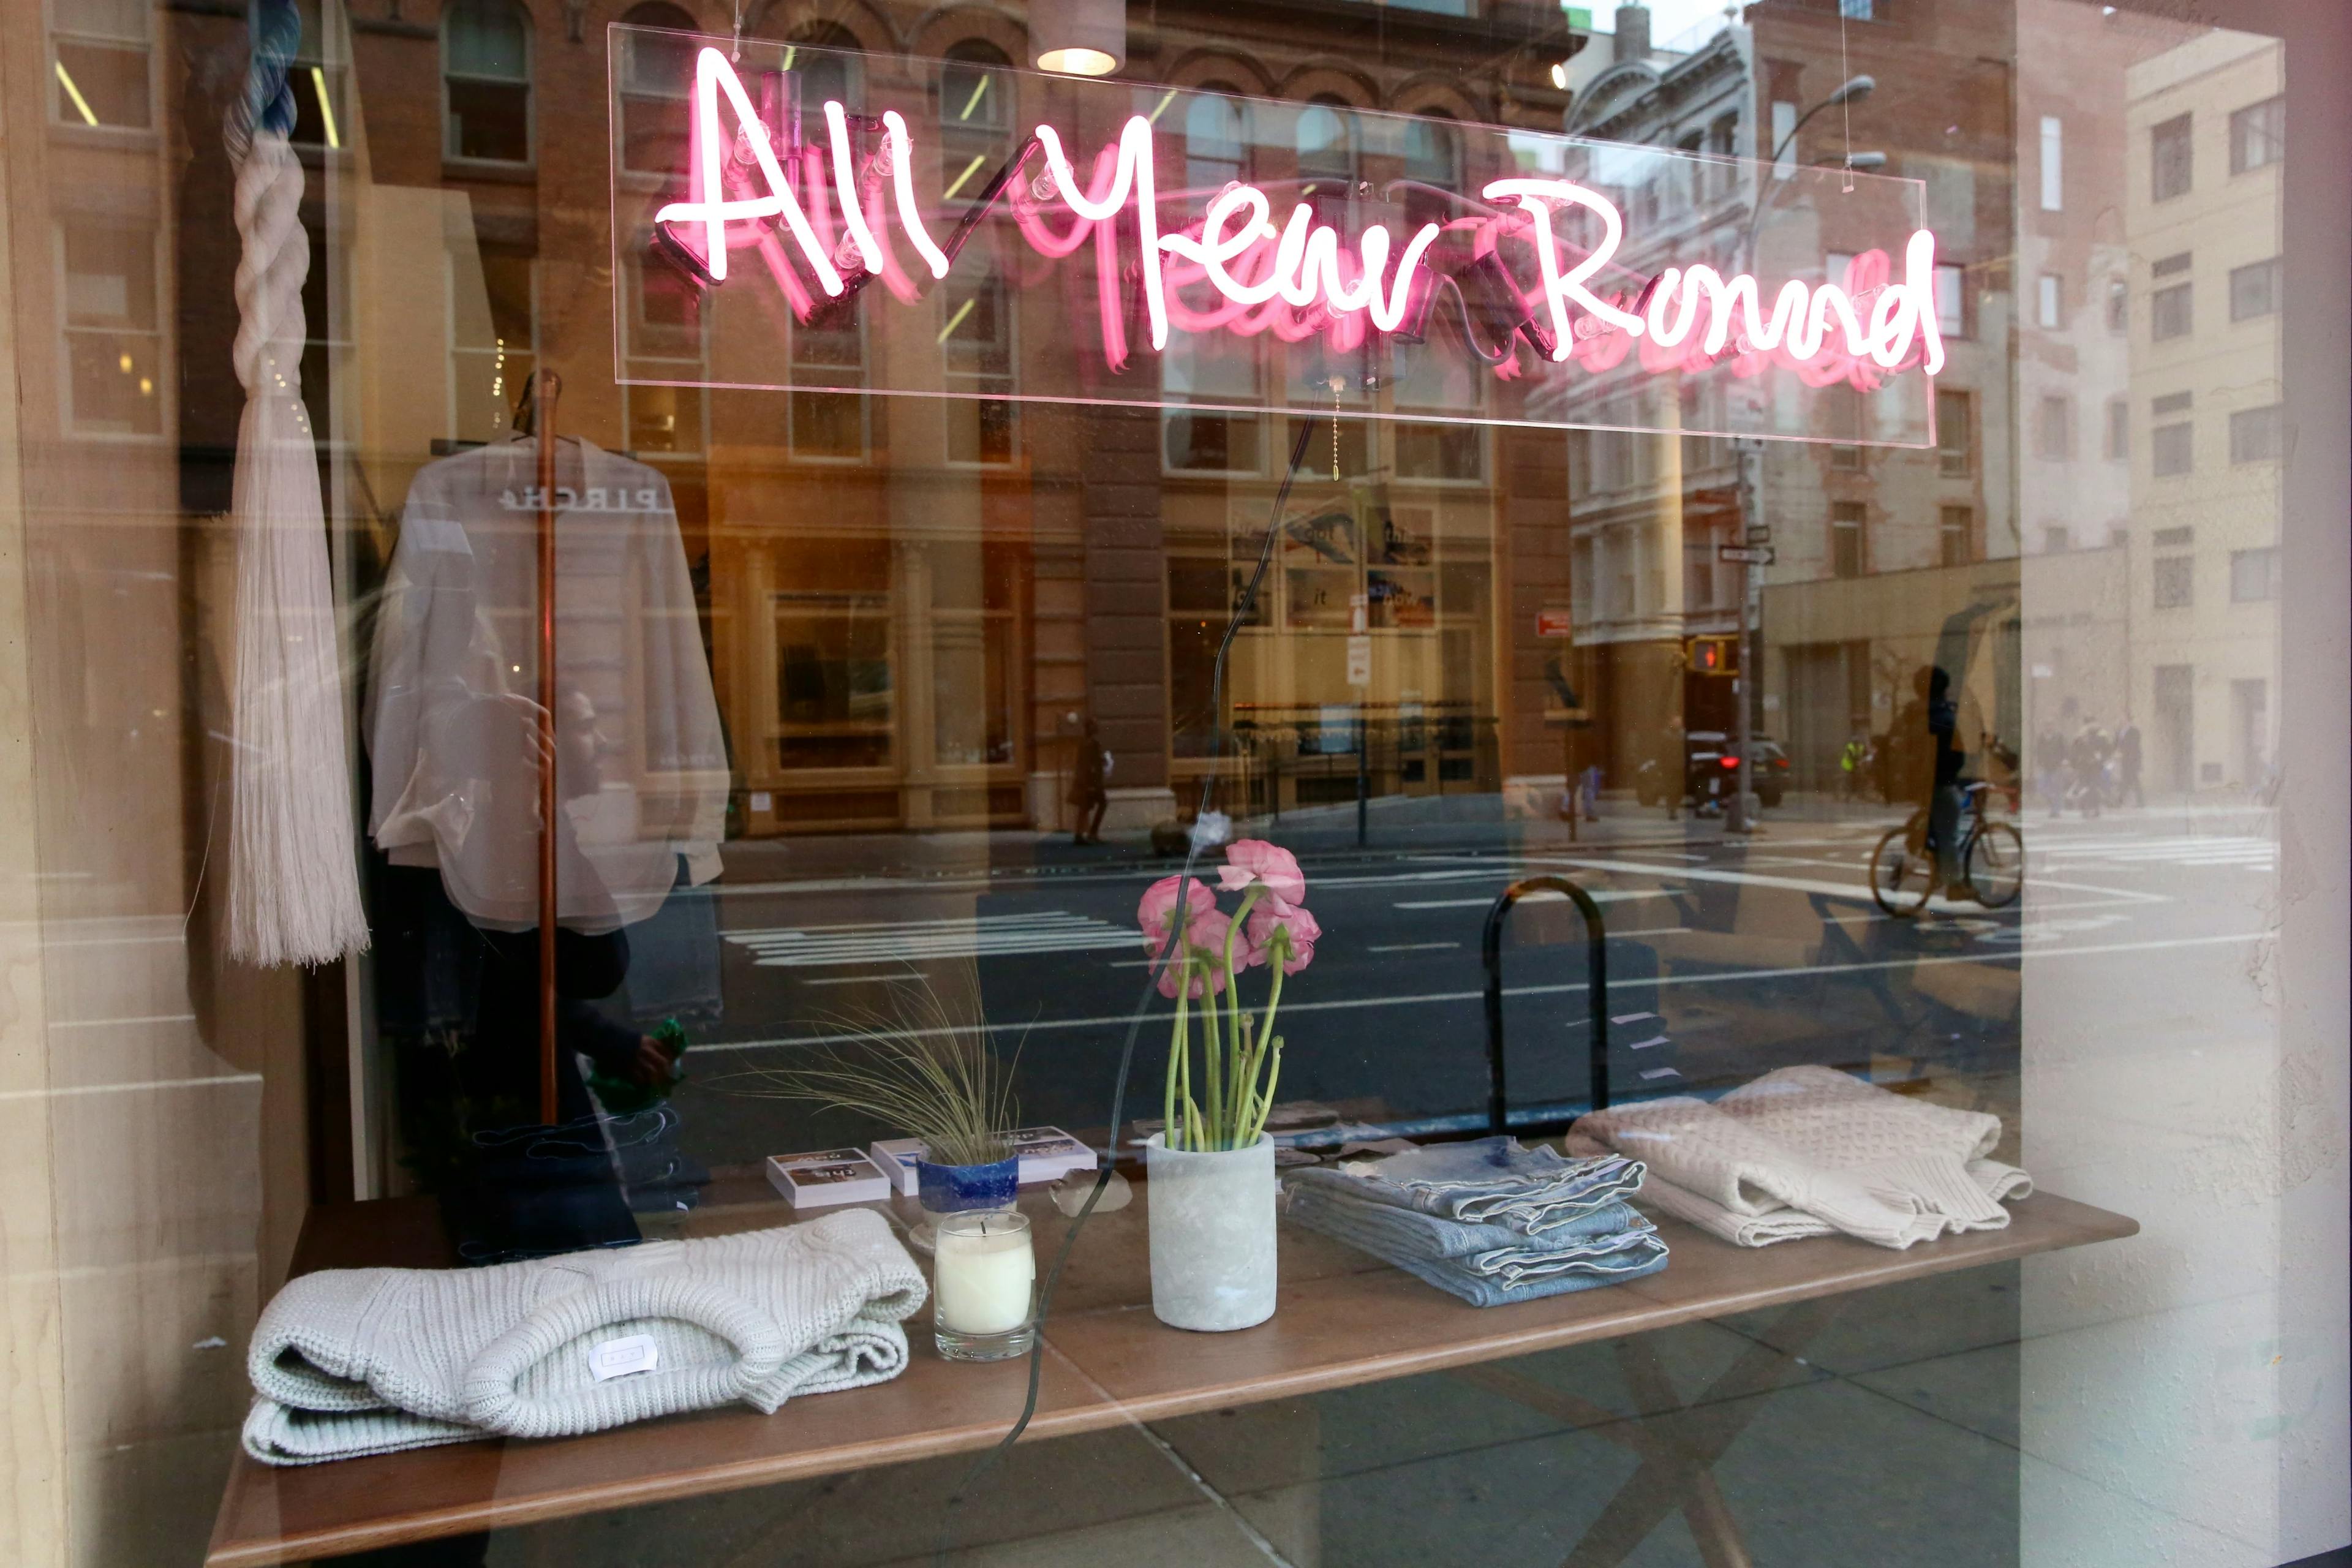 Glass storefront of AYR with a pink neon sign that says "All Year Round".